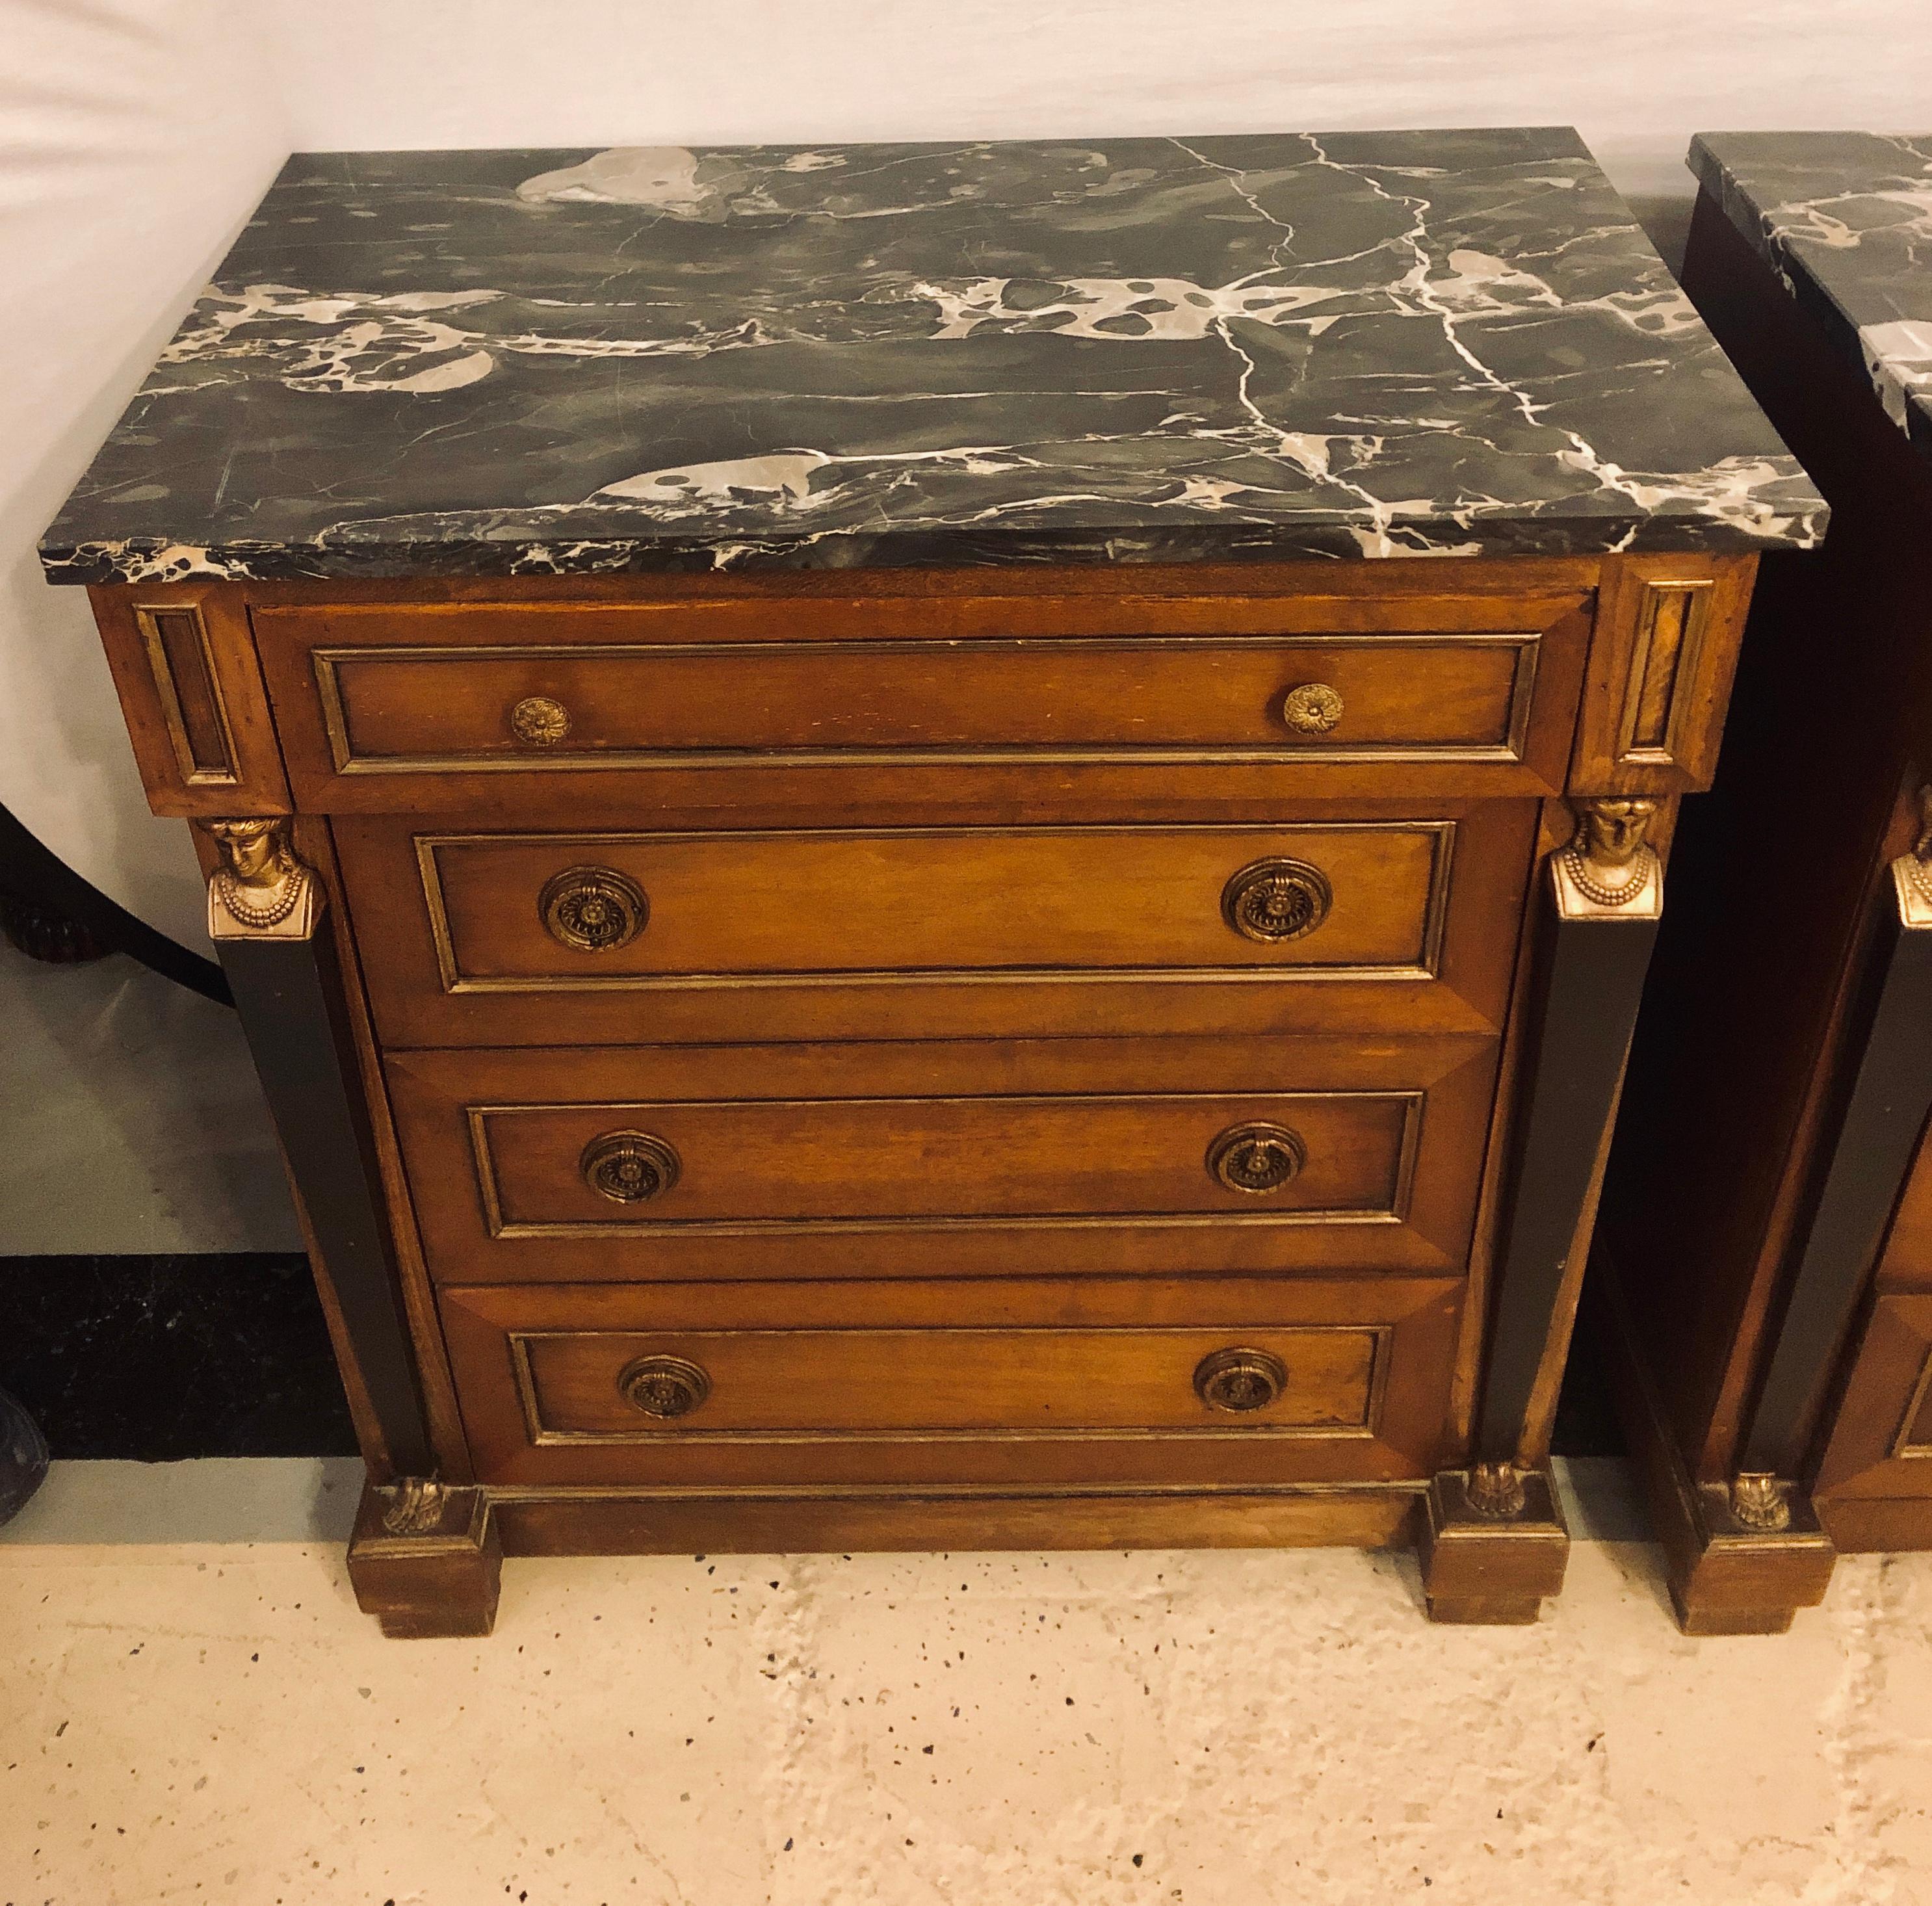 20th Century Pair of Empire Style Bronze Mounted Commodes or Nightstands or End Tables